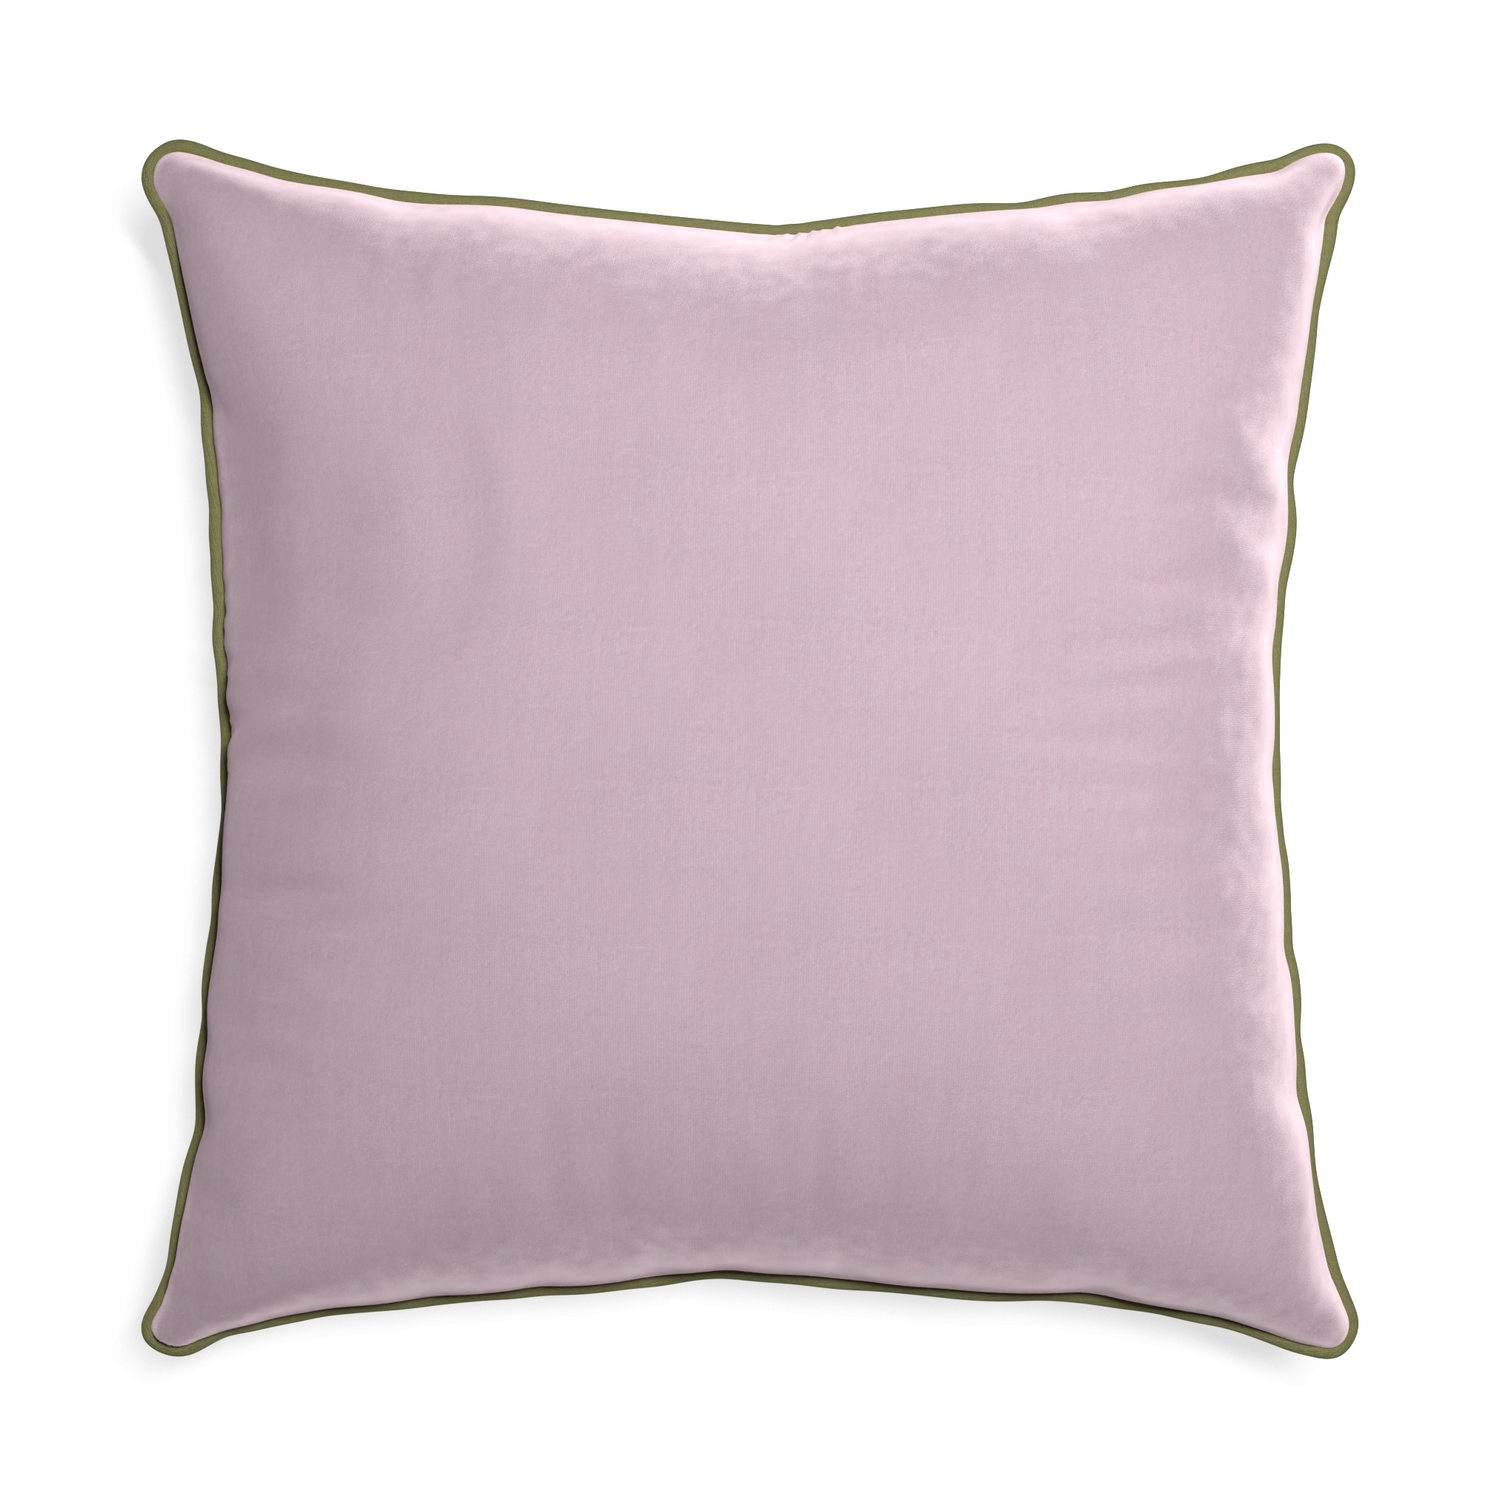 Euro-sham lilac velvet custom lilacpillow with moss piping on white background